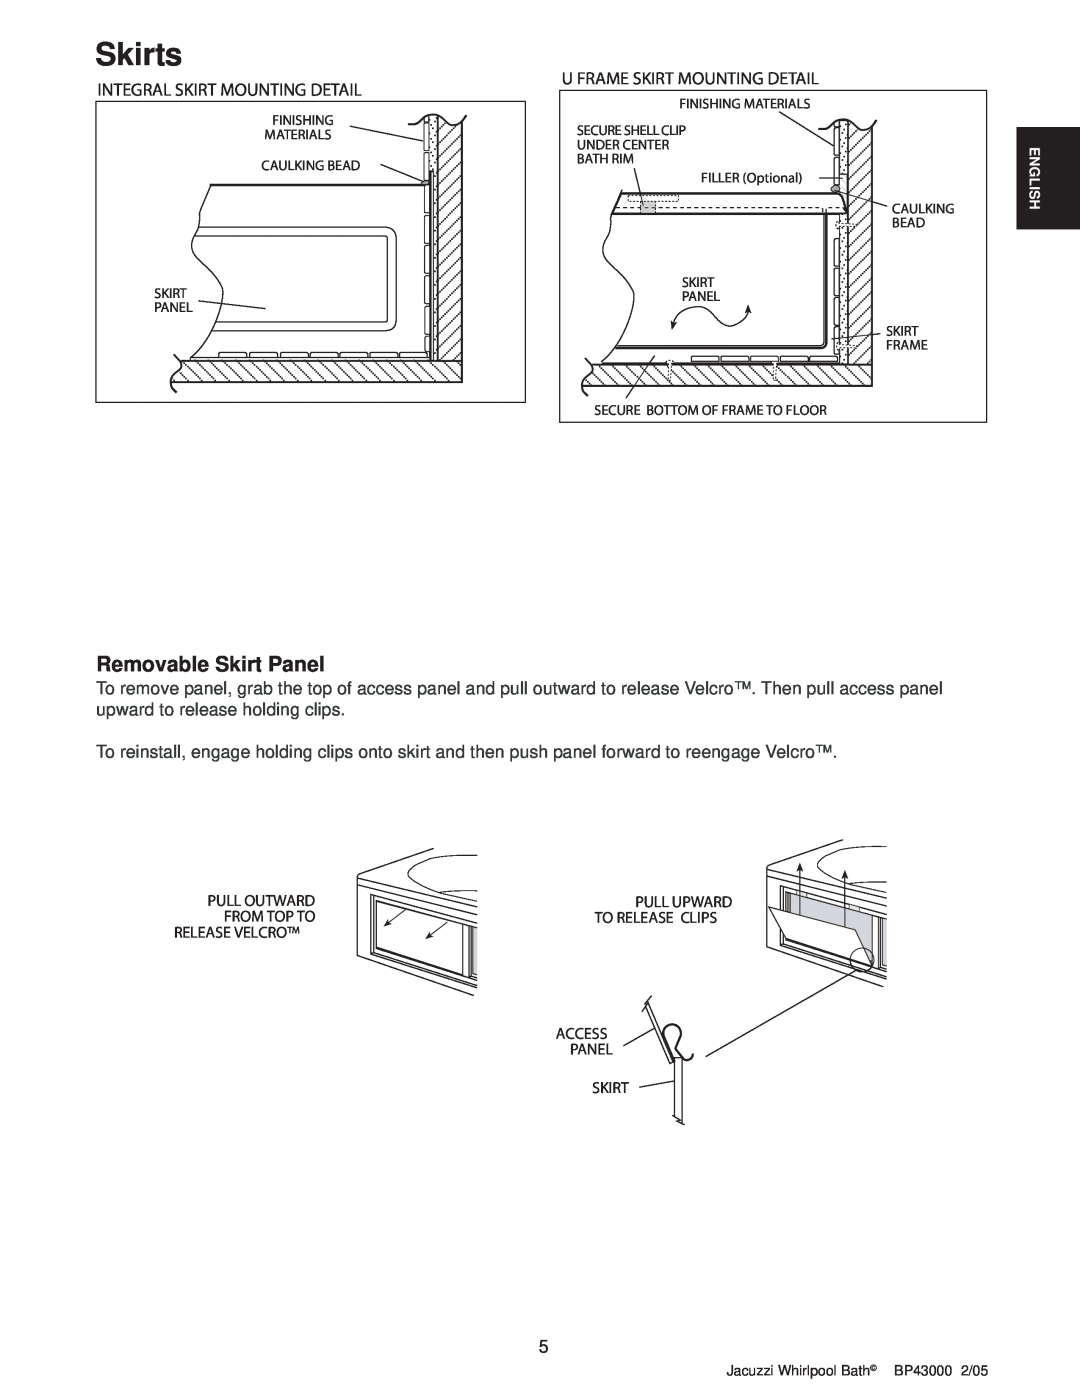 Jacuzzi Comfort Plus Bath Series operating instructions Skirts, Removable Skirt Panel, Integral Skirt Mounting Detail 